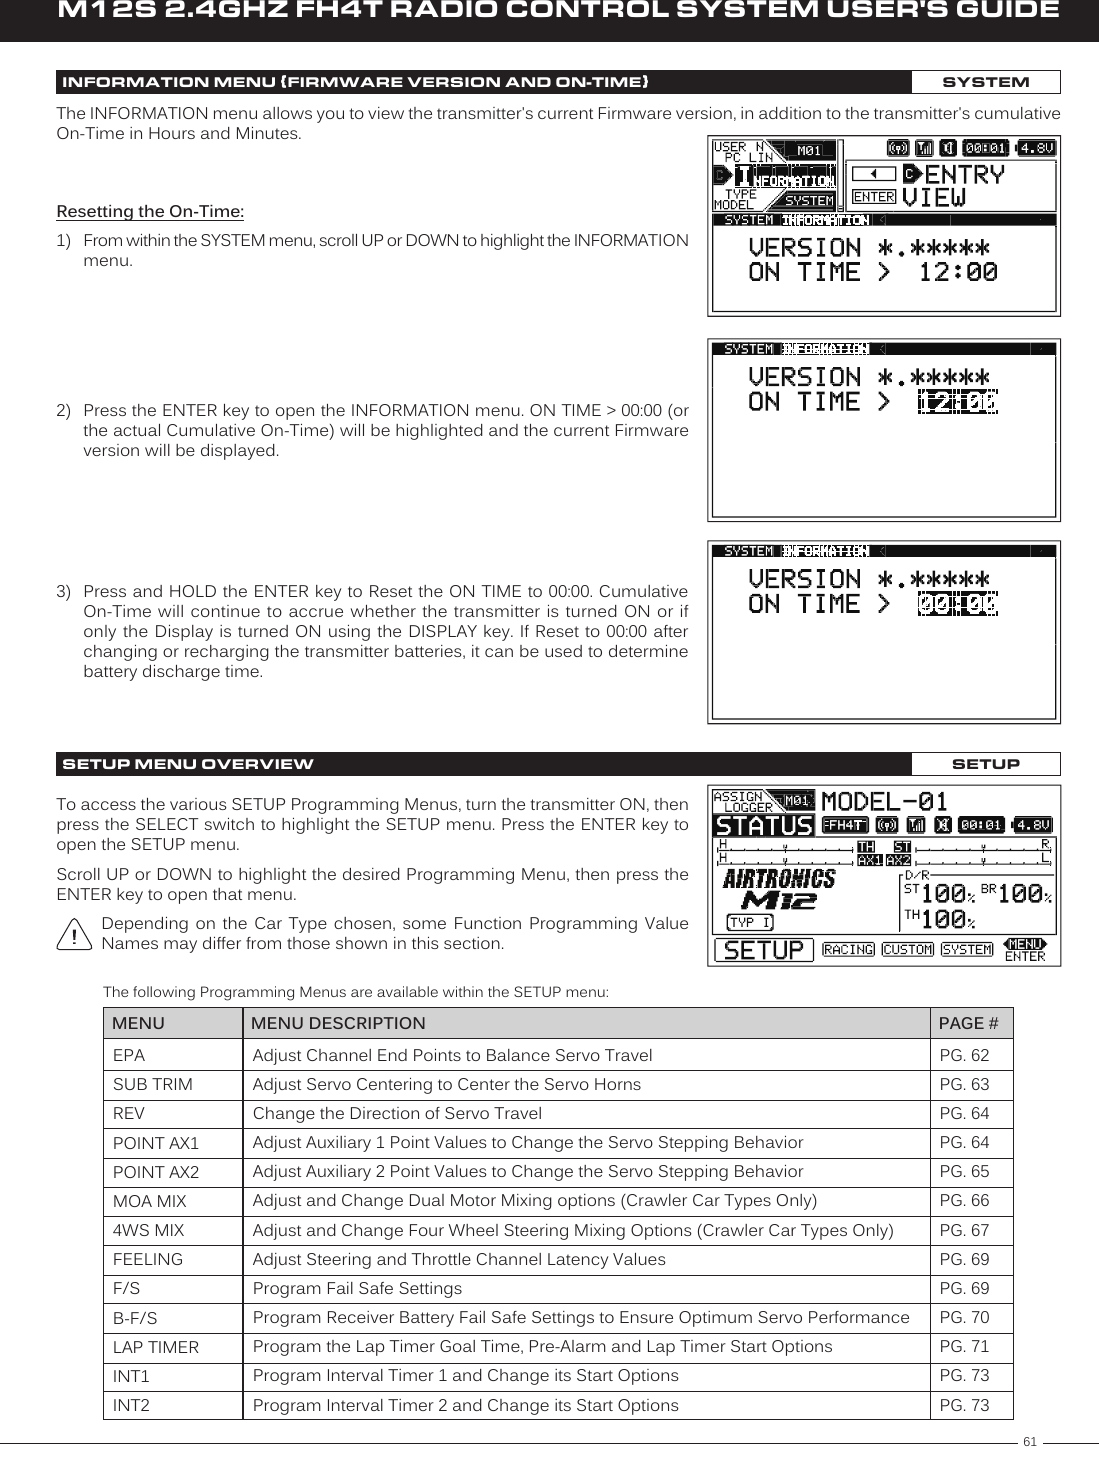 61M12S 2.4GHZ FH4T RADIO CONTROL SYSTEM USER&apos;S GUIDETRINFORMATION MENU {FIRMWARE VERSION AND ON-TIME}SYSTEMResetting the On-Time:1)  From within the SYSTEM menu, scroll UP or DOWN to highlight the INFORMATION menu.2)  Press the ENTER key to open the INFORMATION menu. ON TIME &gt; 00:00 (or the actual Cumulative On-Time) will be highlighted and the current Firmware version will be displayed.The INFORMATION menu allows you to view the transmitter&apos;s current Firmware version, in addition to the transmitter&apos;s cumulative On-Time in Hours and Minutes.3)  Press and HOLD the ENTER key to Reset the ON TIME to 00:00. Cumulative On-Time will continue to accrue whether the transmitter is turned ON or if only the  Display  is turned ON using the  DISPLAY key. If Reset to  00:00 after changing or recharging the transmitter batteries, it can be used to determine battery discharge time.EPASUB TRIMREVPOINT AX1POINT AX2MOA MIX4WS MIXFEELINGF/SB-F/SLAP TIMERINT1INT2PG. 62PG. 63PG. 64PG. 64PG. 65PG. 66PG. 67PG. 69PG. 69PG. 70PG. 71PG. 73PG. 73MENU PAGE #MENU DESCRIPTIONAdjust Channel End Points to Balance Servo TravelAdjust Servo Centering to Center the Servo HornsChange the Direction of Servo TravelAdjust Auxiliary 1 Point Values to Change the Servo Stepping BehaviorAdjust Auxiliary 2 Point Values to Change the Servo Stepping BehaviorAdjust and Change Dual Motor Mixing options (Crawler Car Types Only)Adjust and Change Four Wheel Steering Mixing Options (Crawler Car Types Only)Adjust Steering and Throttle Channel Latency ValuesProgram Fail Safe SettingsProgram Receiver Battery Fail Safe Settings to Ensure Optimum Servo PerformanceProgram the Lap Timer Goal Time, Pre-Alarm and Lap Timer Start OptionsProgram Interval Timer 1 and Change its Start OptionsProgram Interval Timer 2 and Change its Start OptionsThe following Programming Menus are available within the SETUP menu:To access the various SETUP Programming Menus, turn the transmitter ON, then press the SELECT switch to highlight the SETUP menu. Press the ENTER key to open the SETUP menu.Scroll UP or DOWN to highlight the desired Programming Menu, then press the ENTER key to open that menu.Depending  on  the  Car  Type  chosen,  some  Function  Programming  Value Names may differ from those shown in this section.SETUP MENU OVERVIEW SETUP